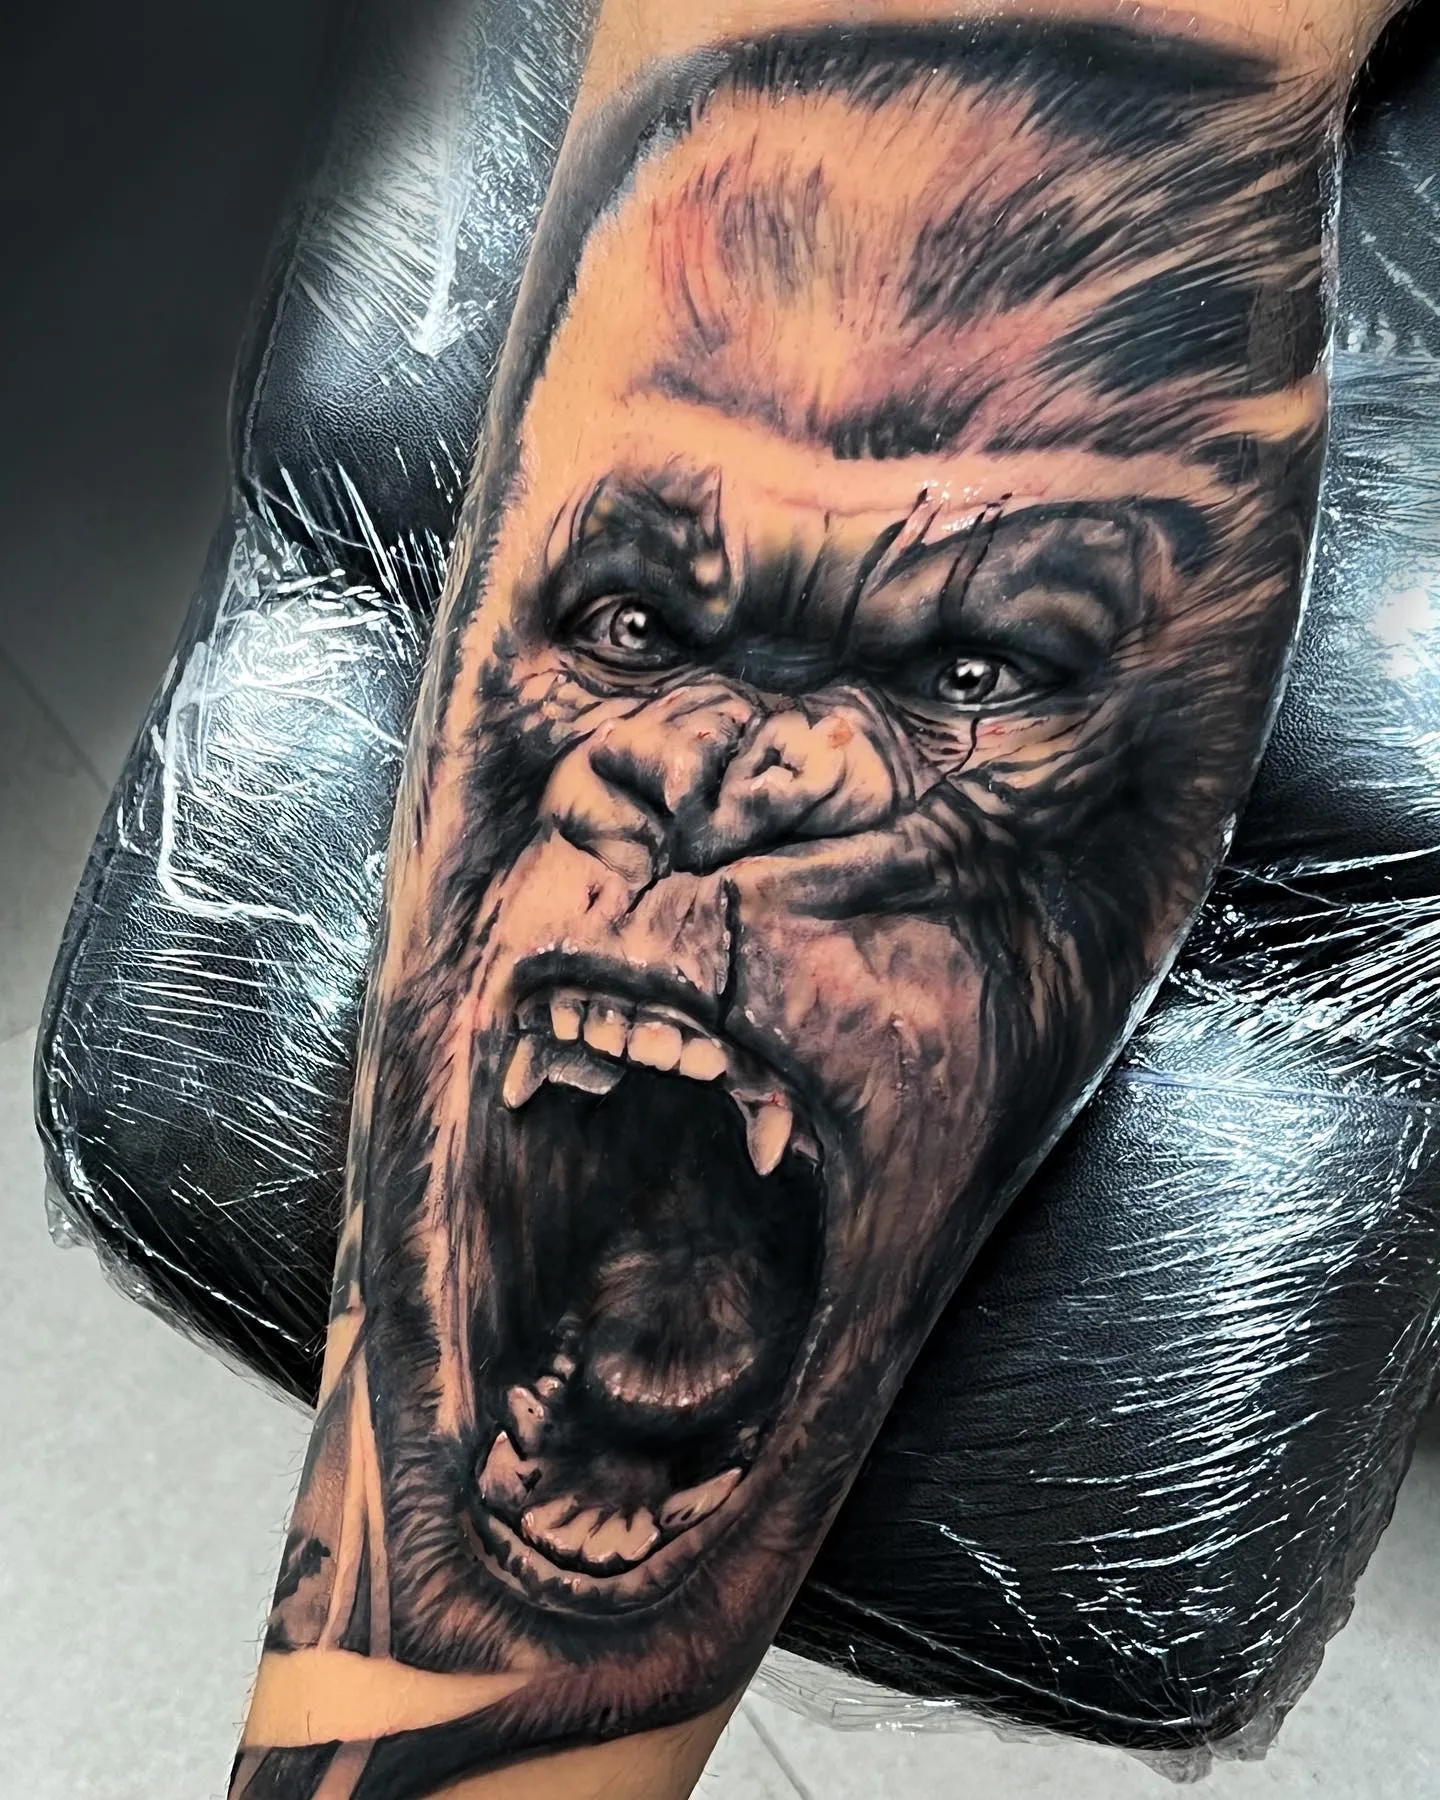 Fierce Kong in Black and Gray on Arm